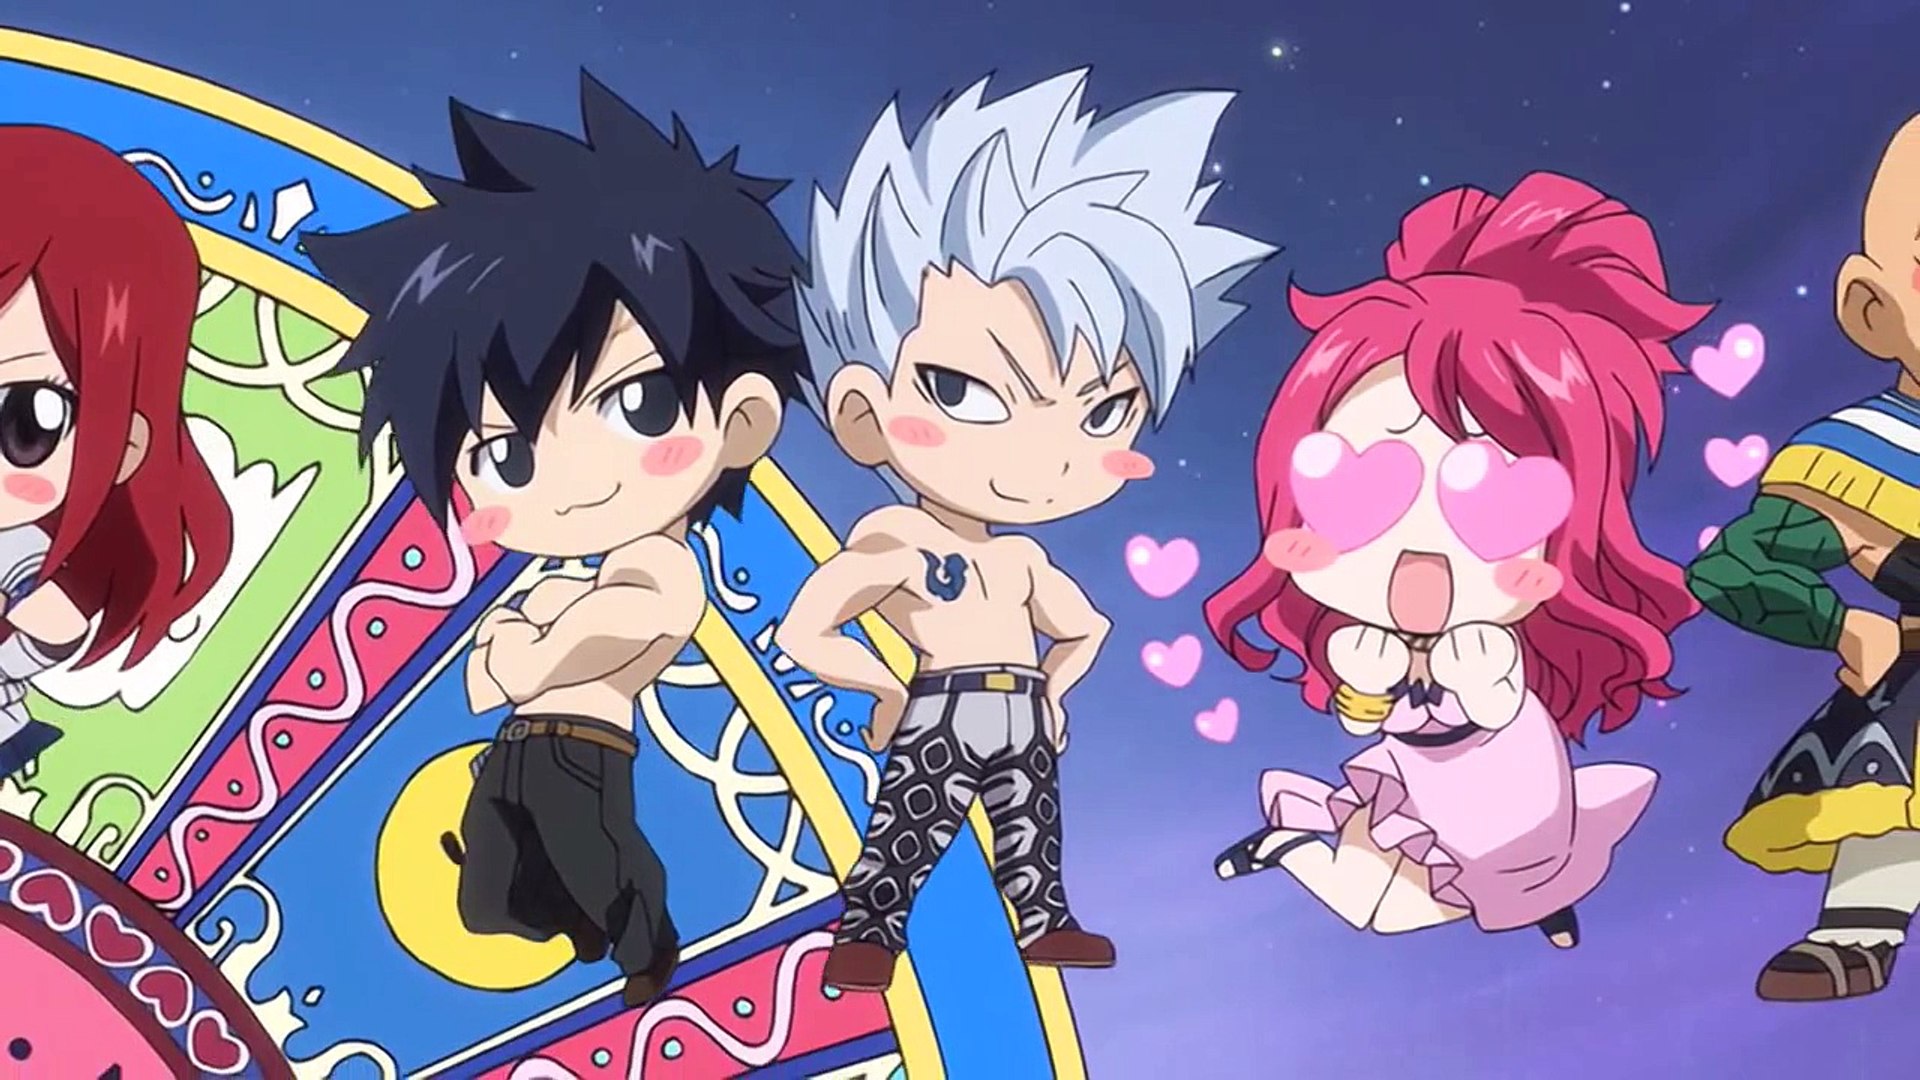 Fairy Tail Ending 5 Video Dailymotion